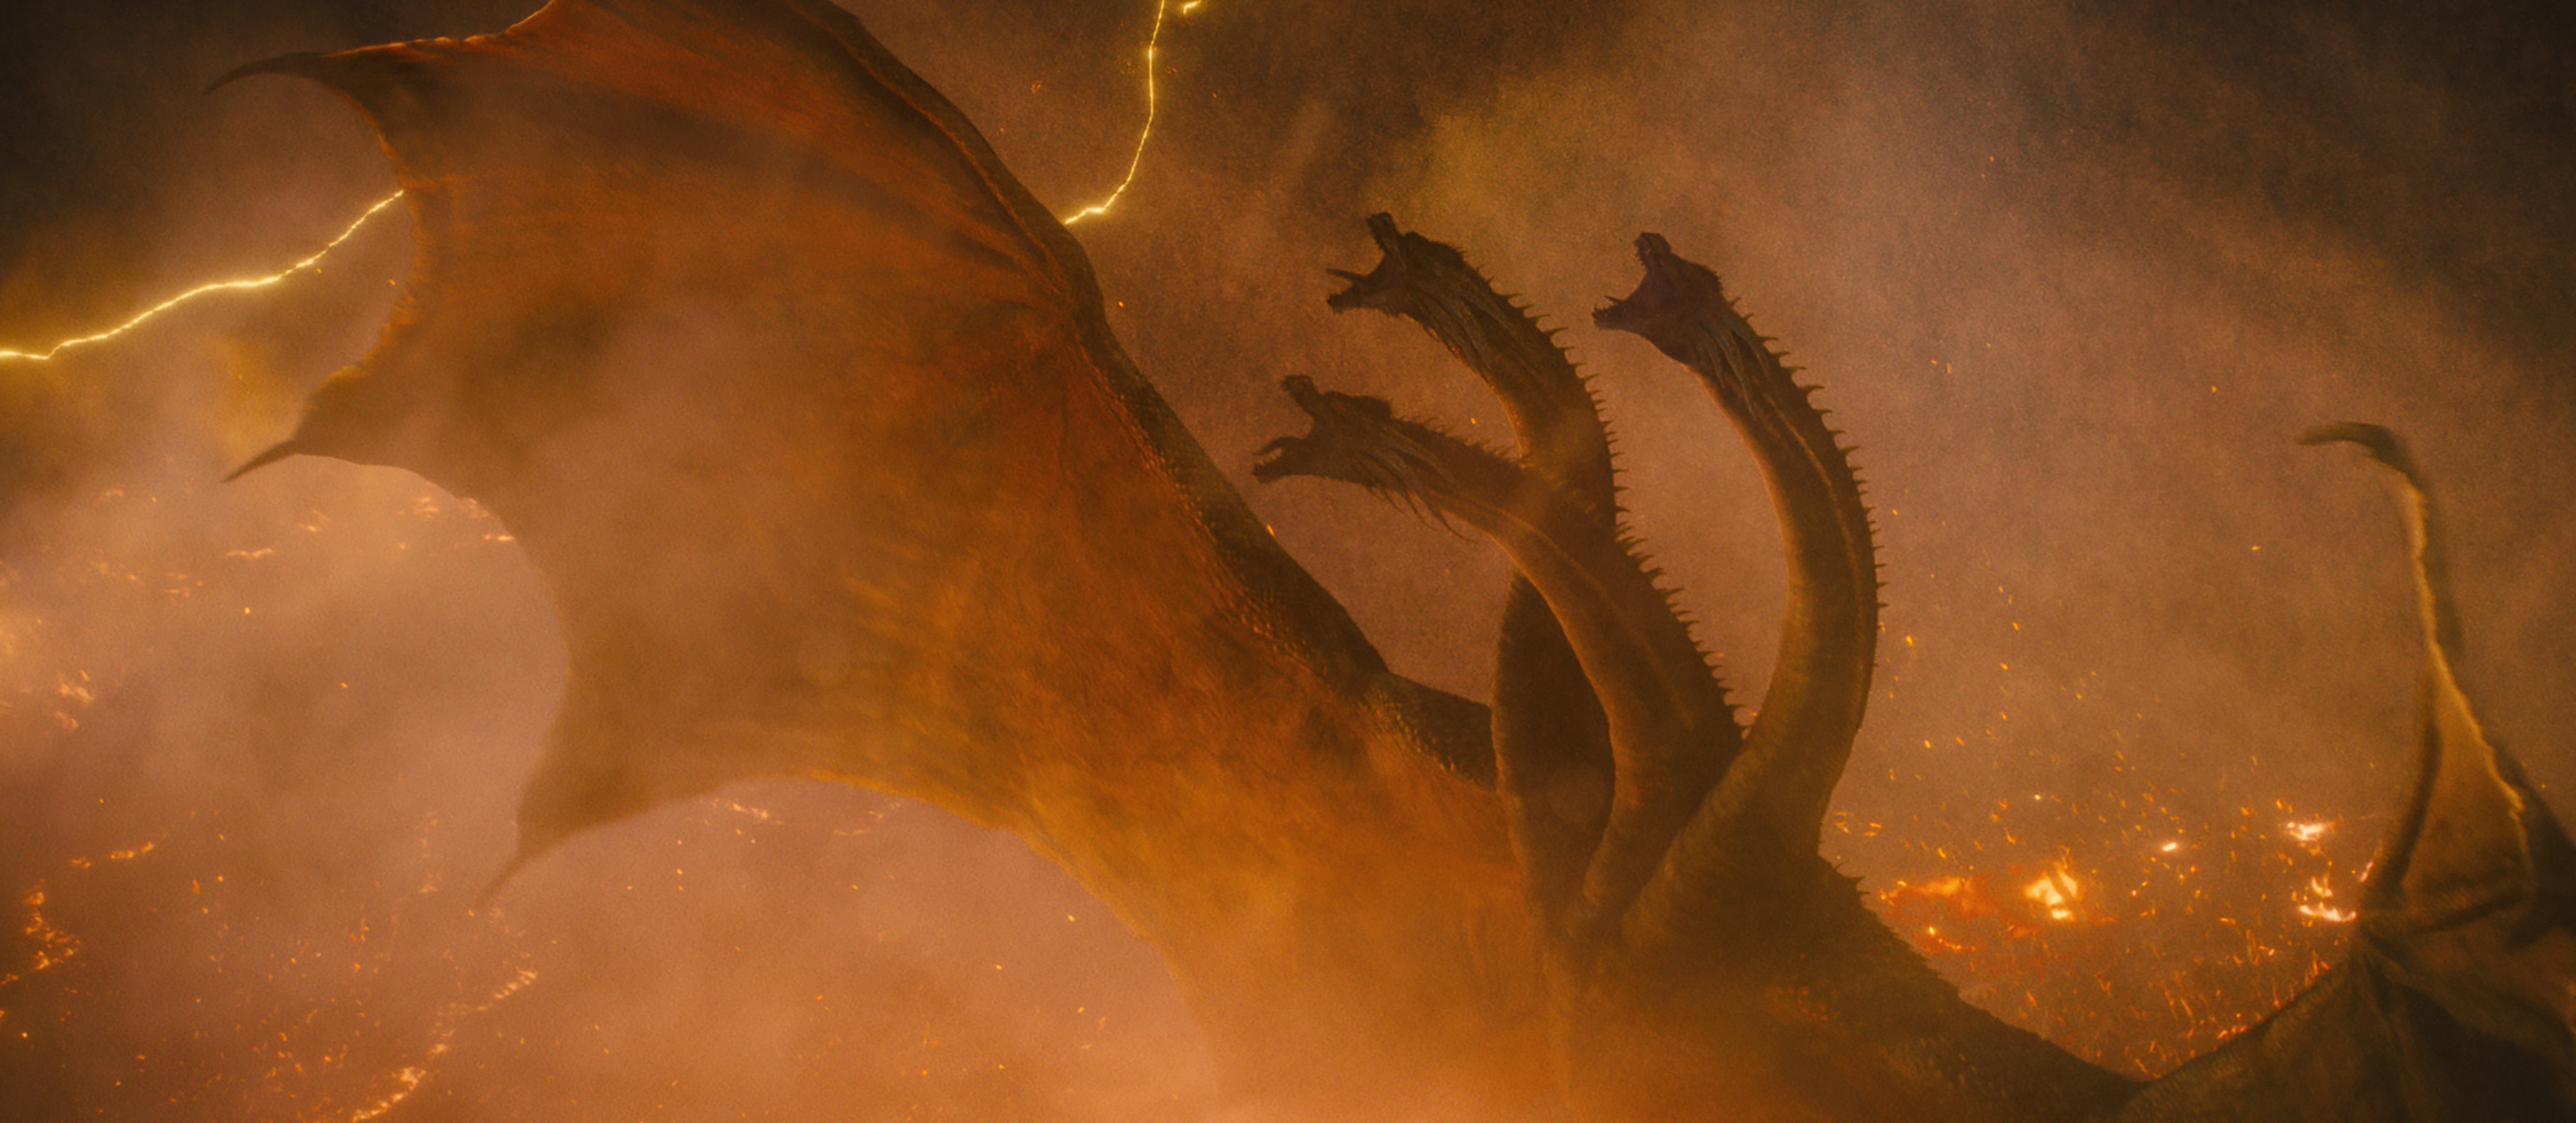 Godzilla Vs King Ghidorah King Of The Monsters Wallpapers